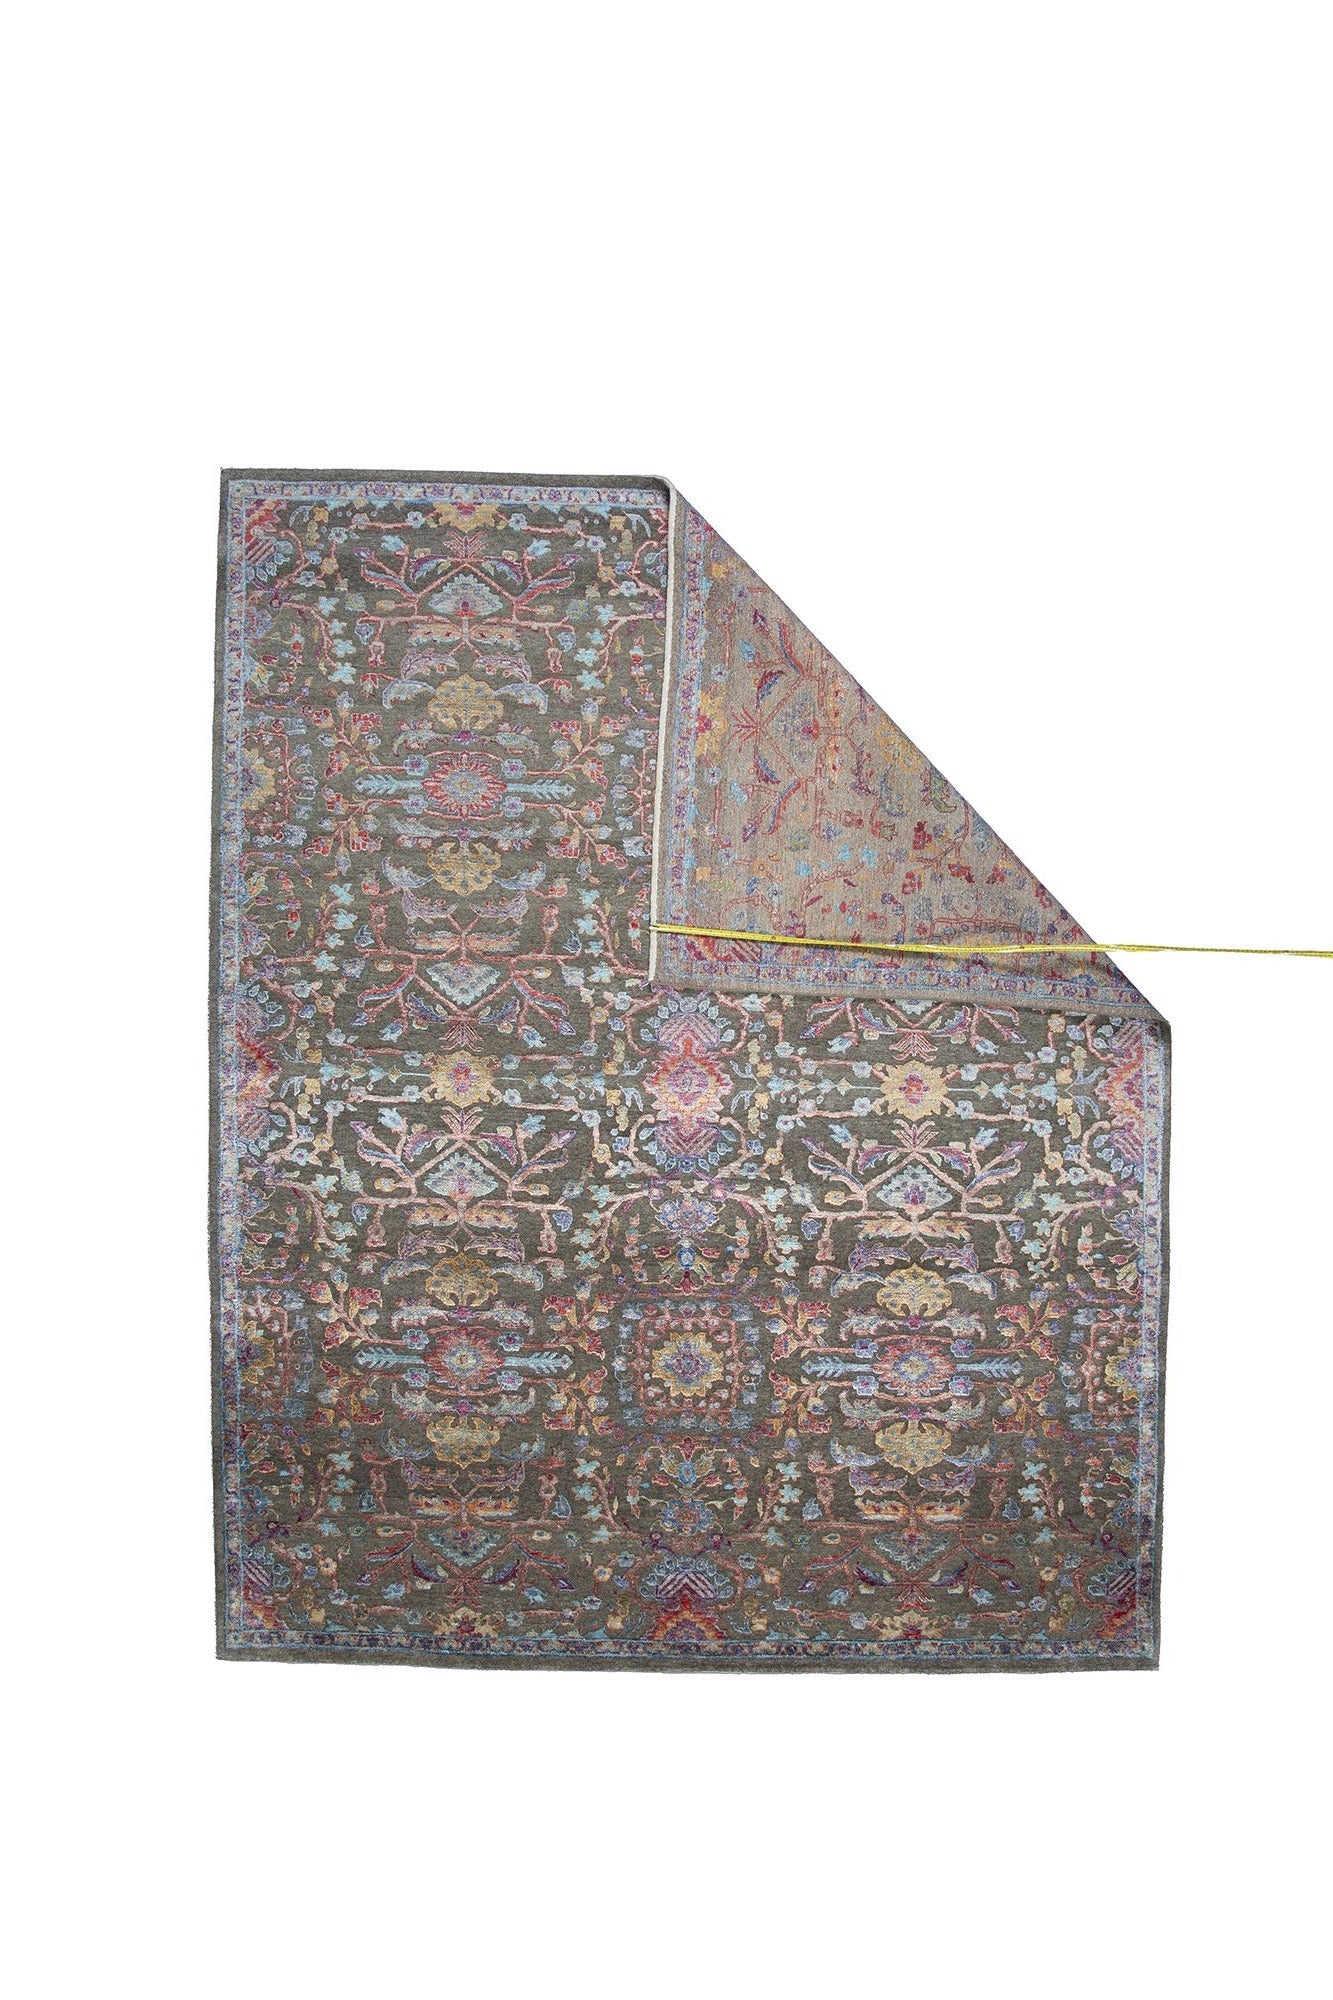 Modern Fine Hand-Knotted Wool & Silk Indian Carpet product image #27555860185258